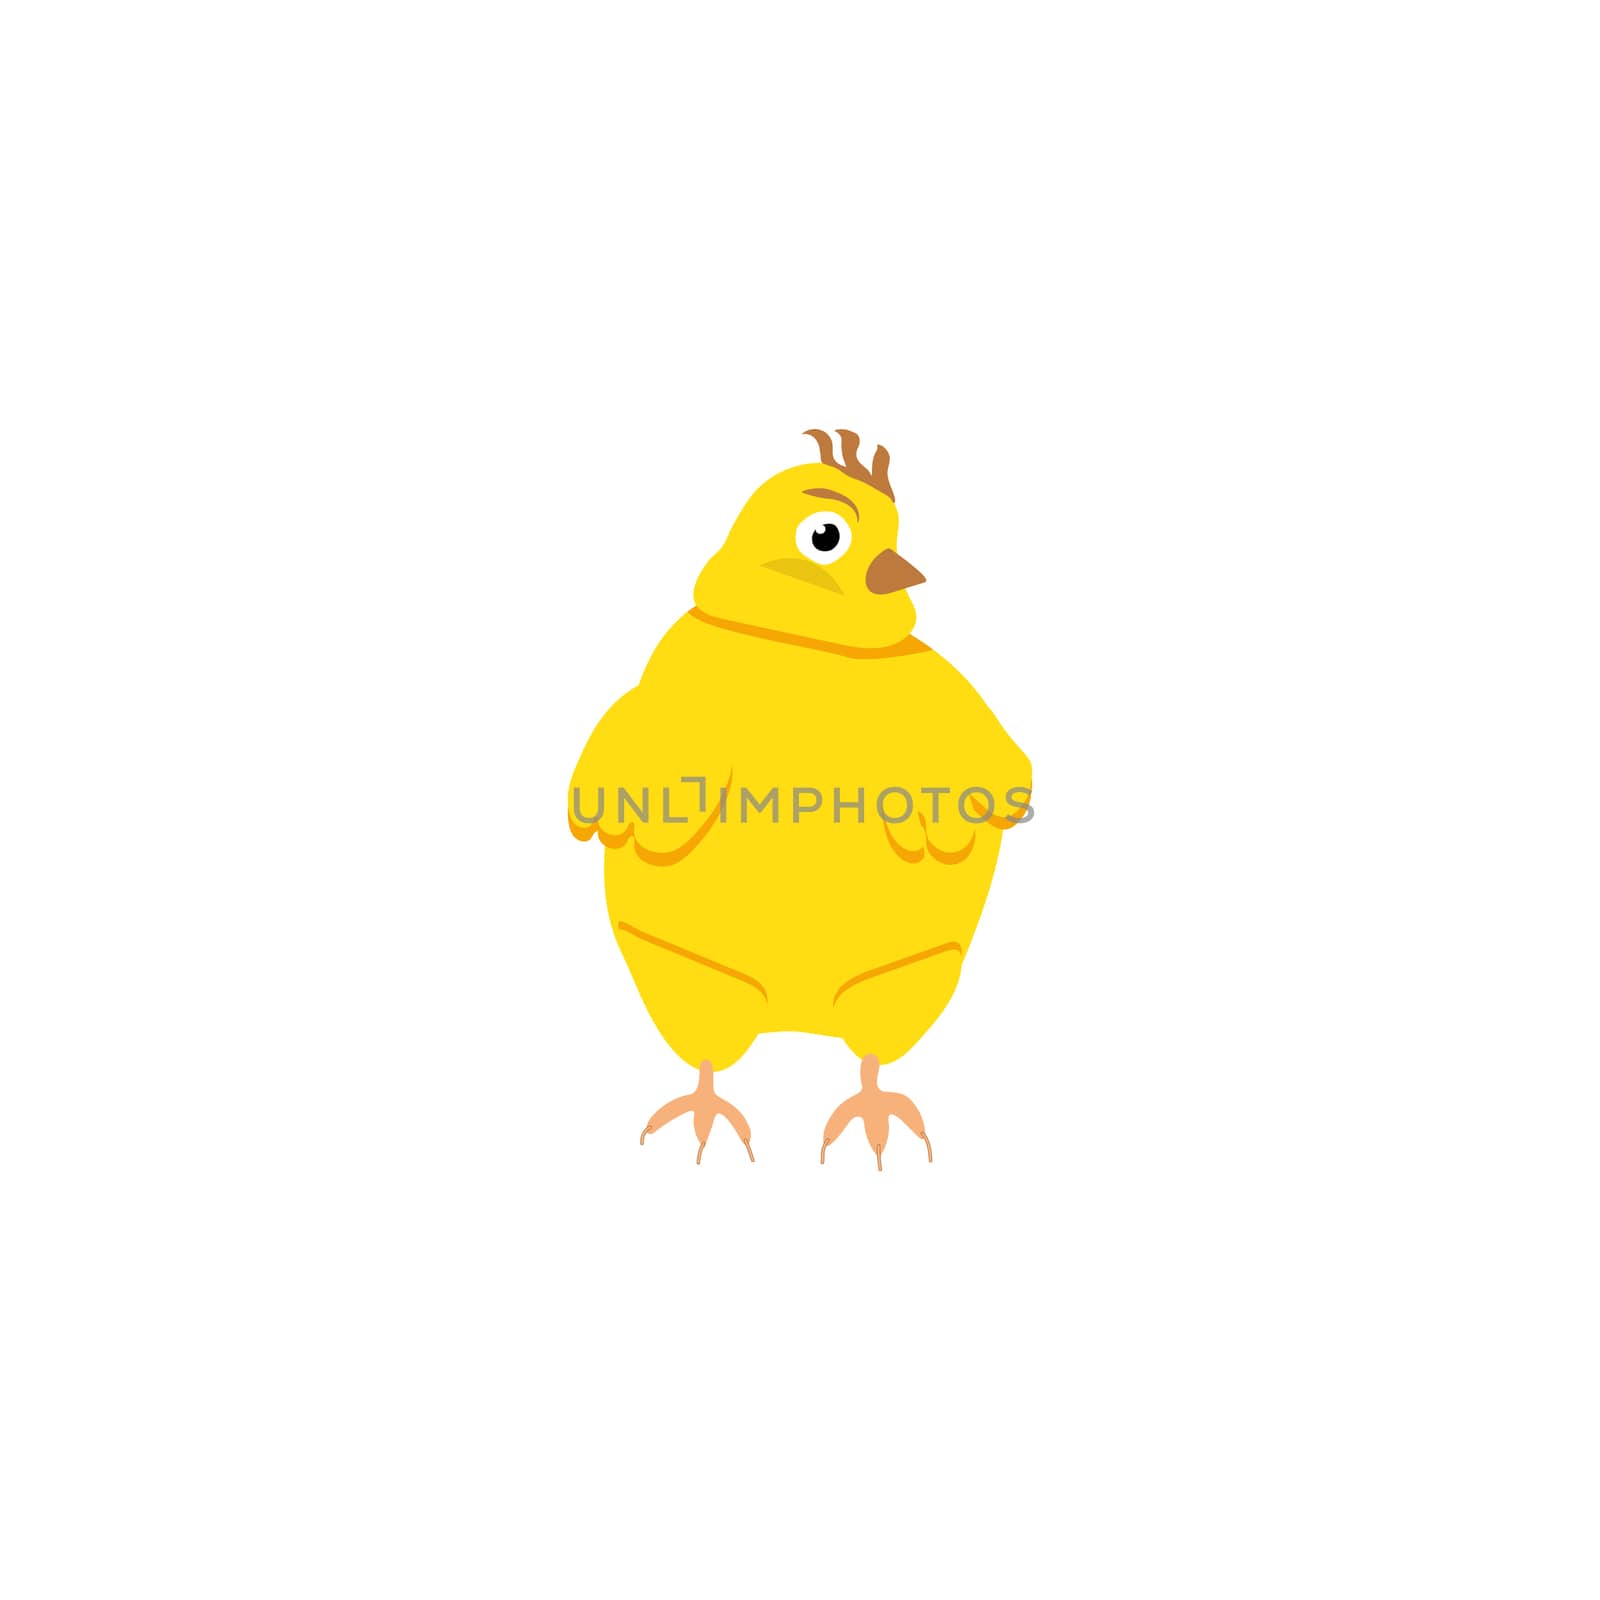 Cute Easter holiday yellow chicken. Vector illustration isolated on white background.